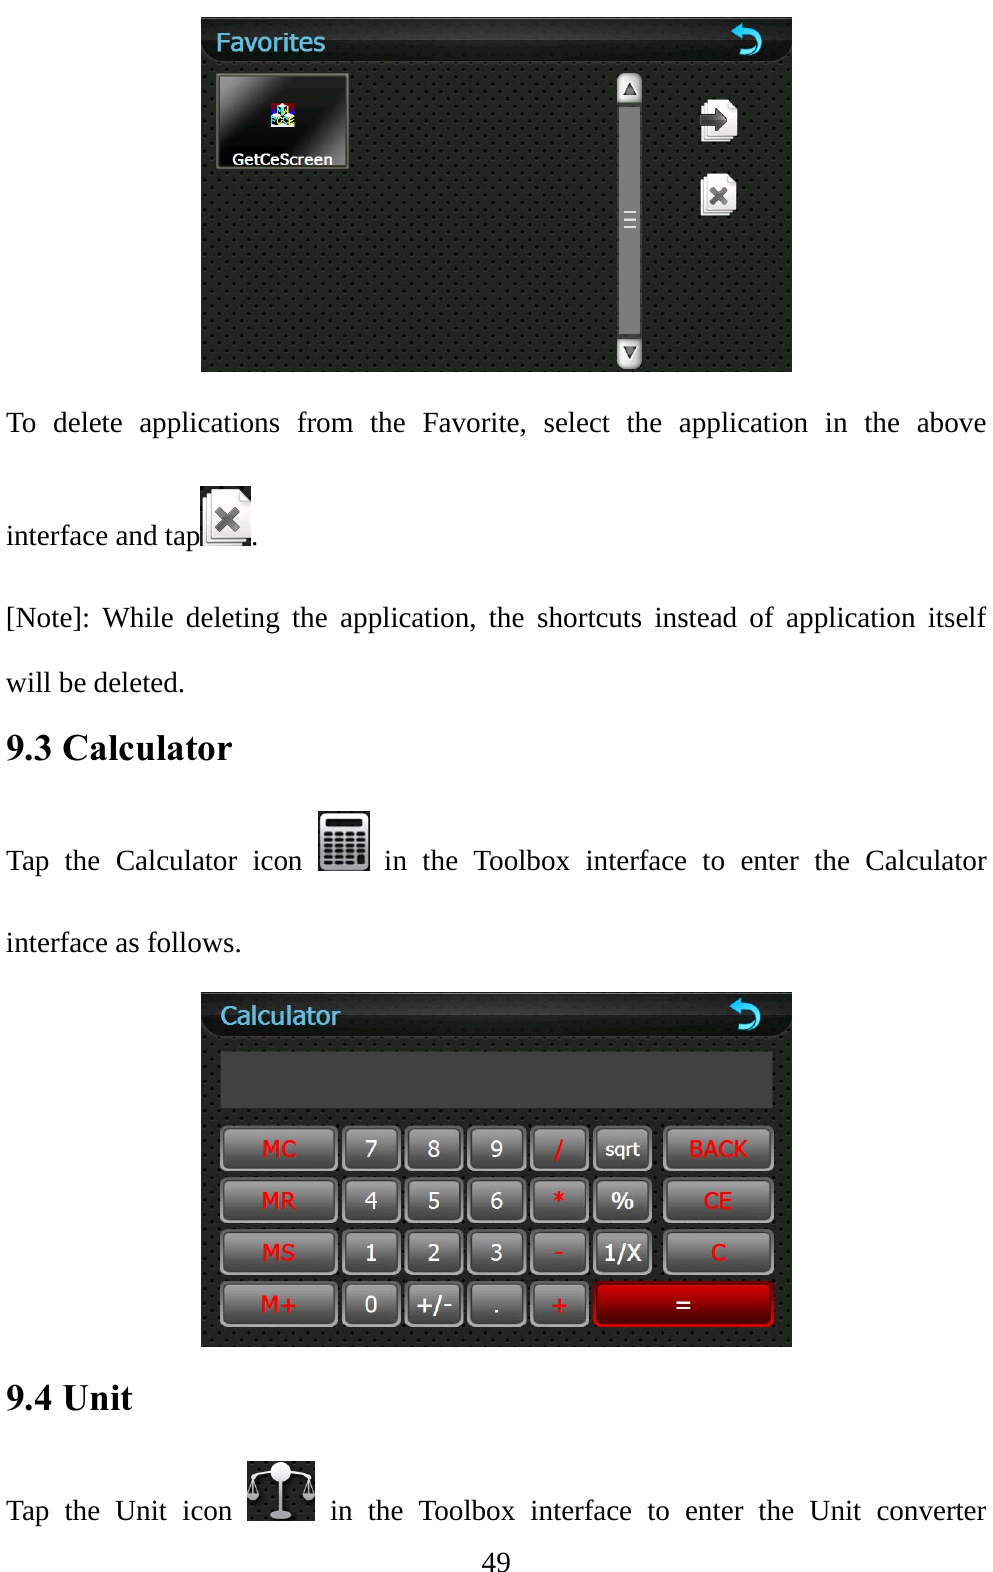  49  To delete applications from the Favorite, select the application in the above interface and tap . [Note]: While deleting the application, the shortcuts instead of application itself will be deleted. 9.3 Calculator Tap the Calculator icon   in the Toolbox interface to enter the Calculator interface as follows.  9.4 Unit   Tap the Unit icon   in the Toolbox interface to enter the Unit converter 